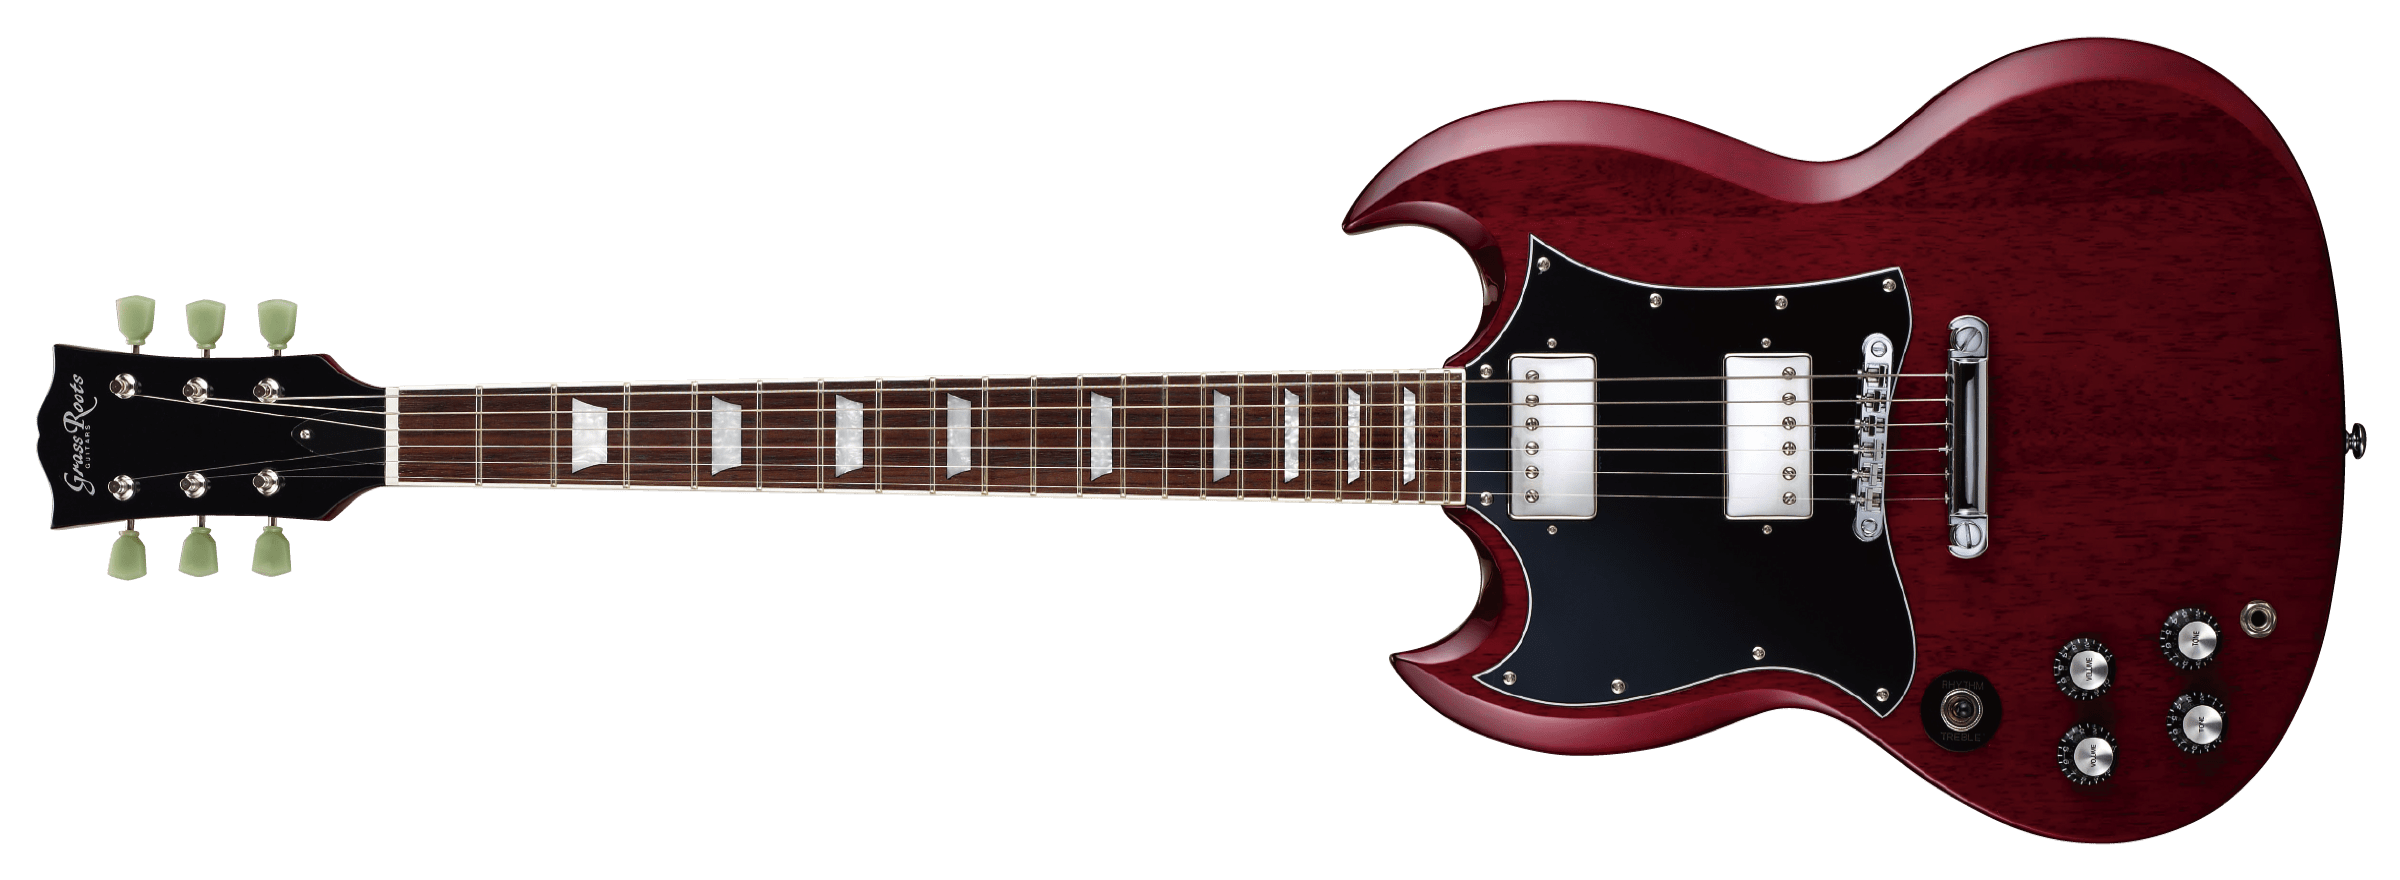 Grass Roots エレキギター G-SG-55L - 弦楽器、ギター